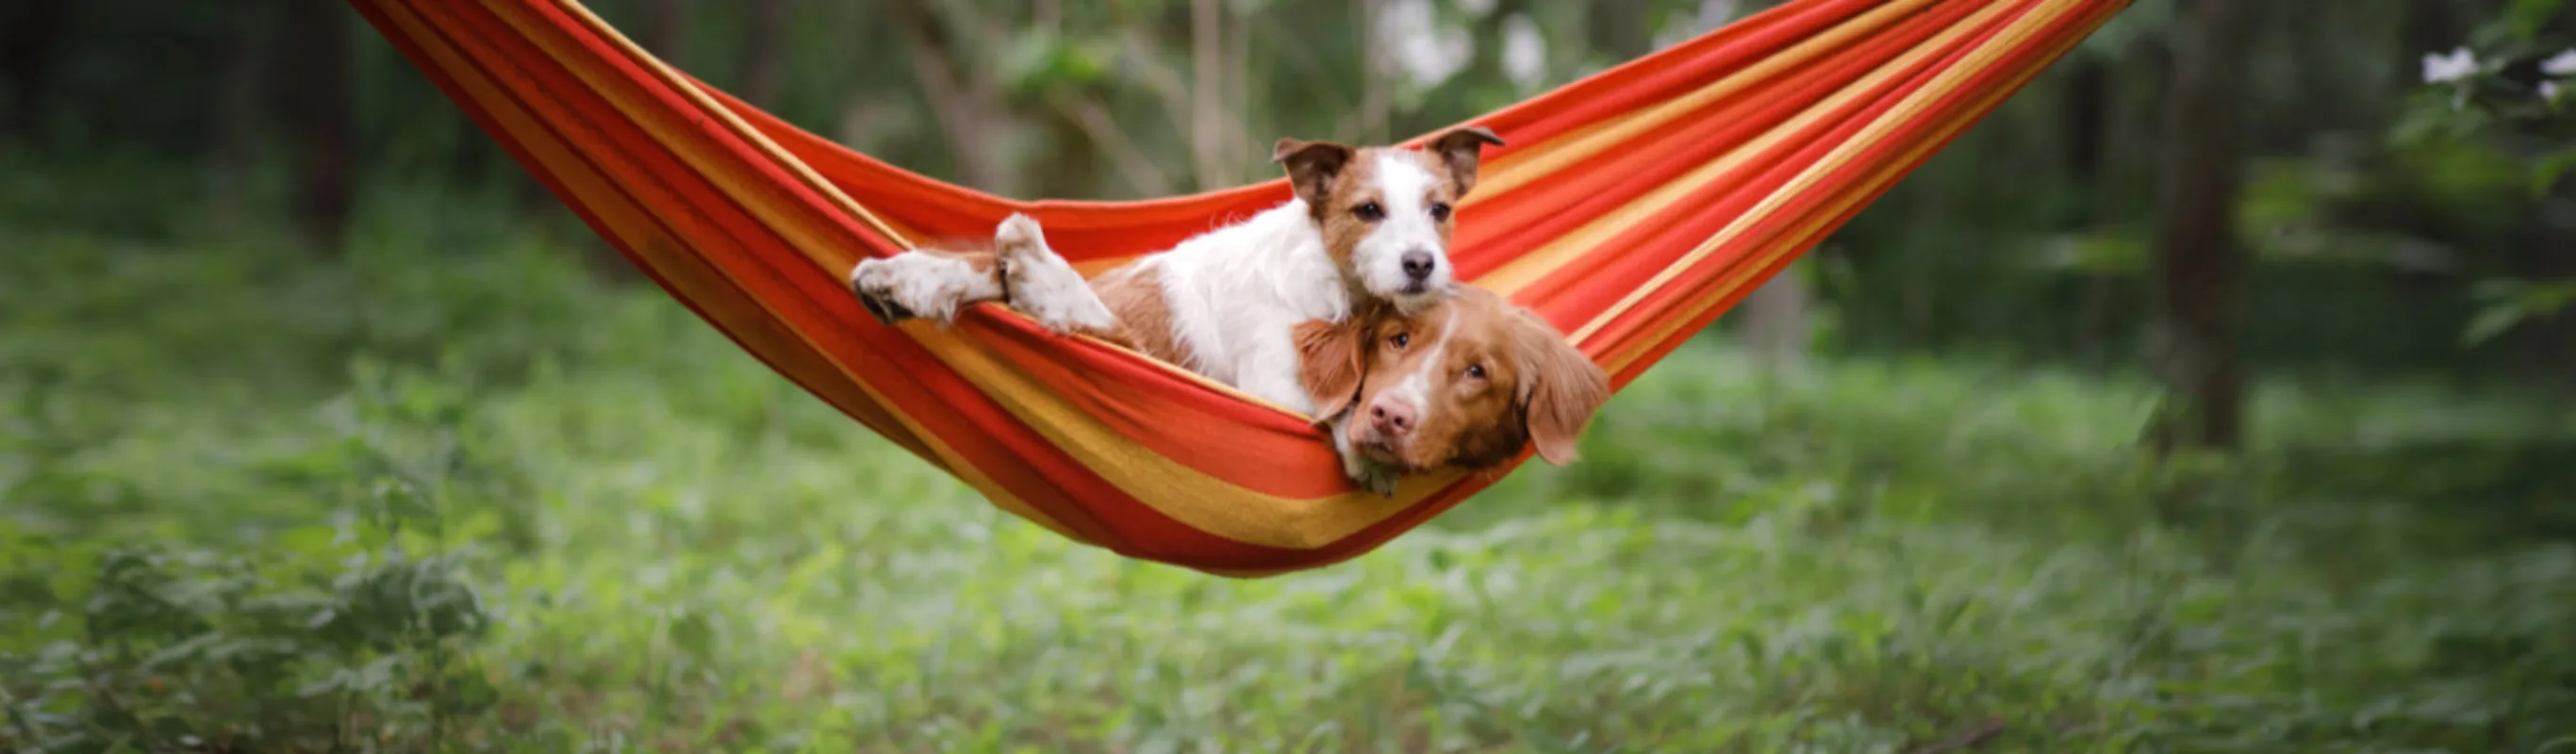 2 Dogs Lying on a Red Hammock Together